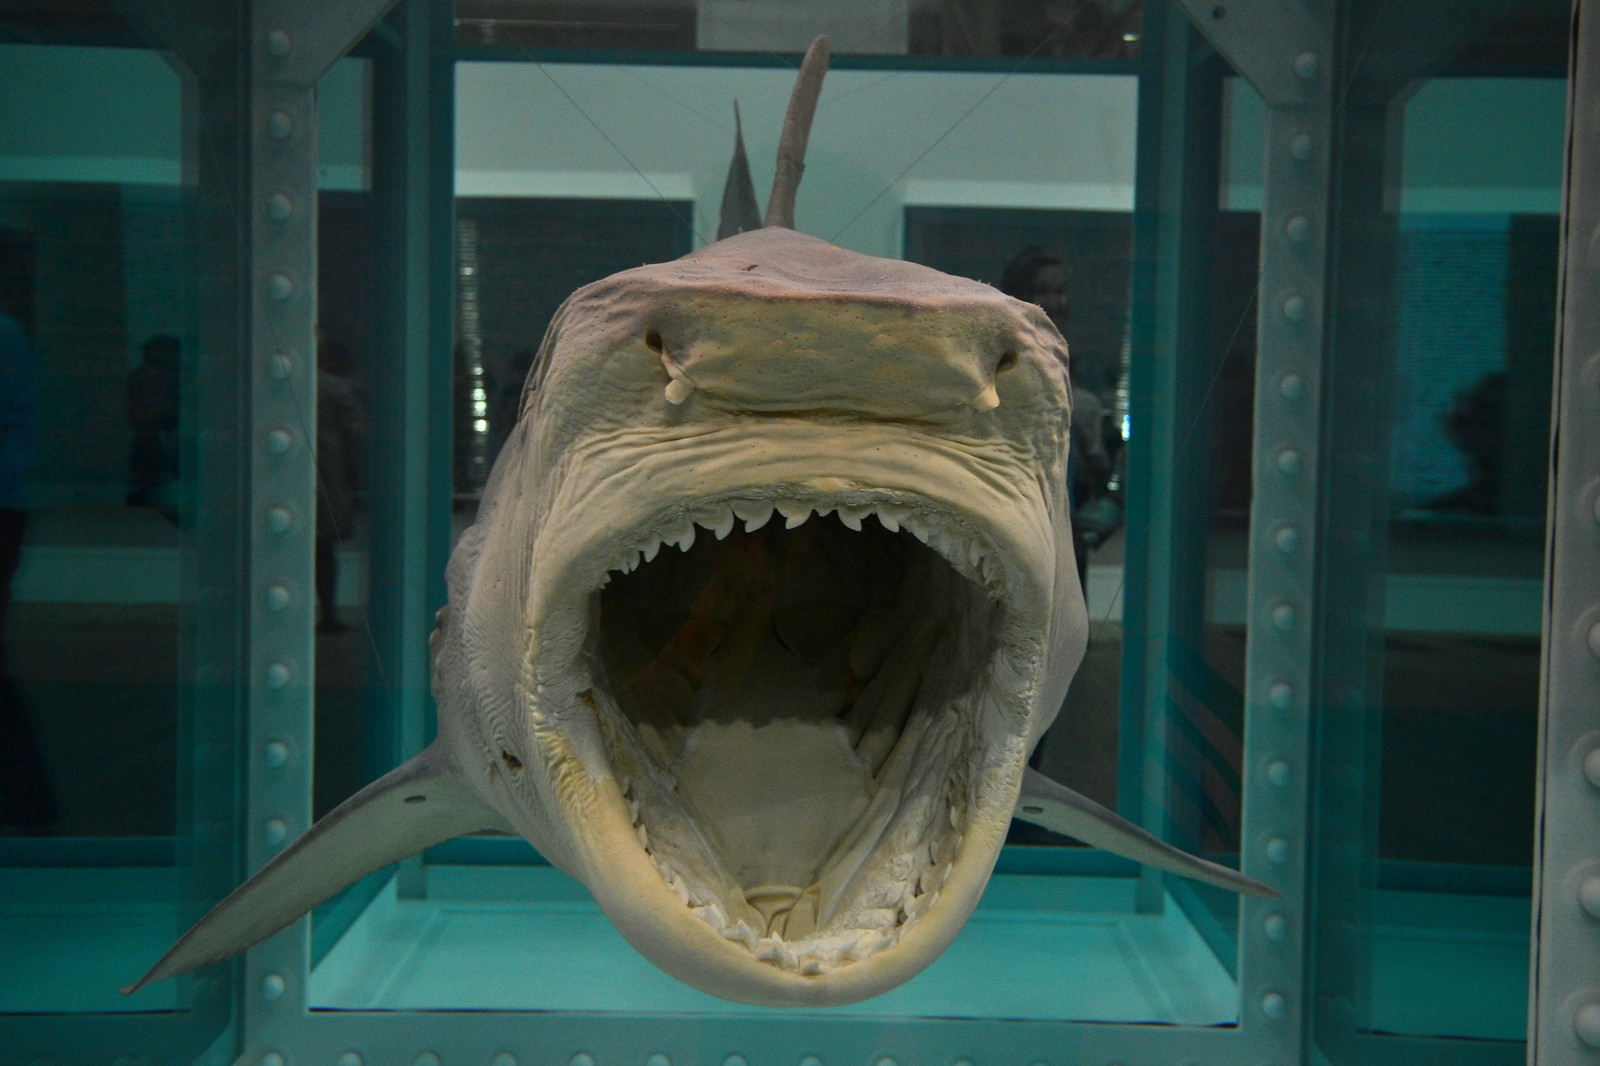 Damien Hirst. The Physical Impossibility of Death in the Mind of Someone Living. 1991. Tiger shark, glass, steel, 5% formaldehyde. 213 х 518 cm. Собрание Стивена А. Коэна